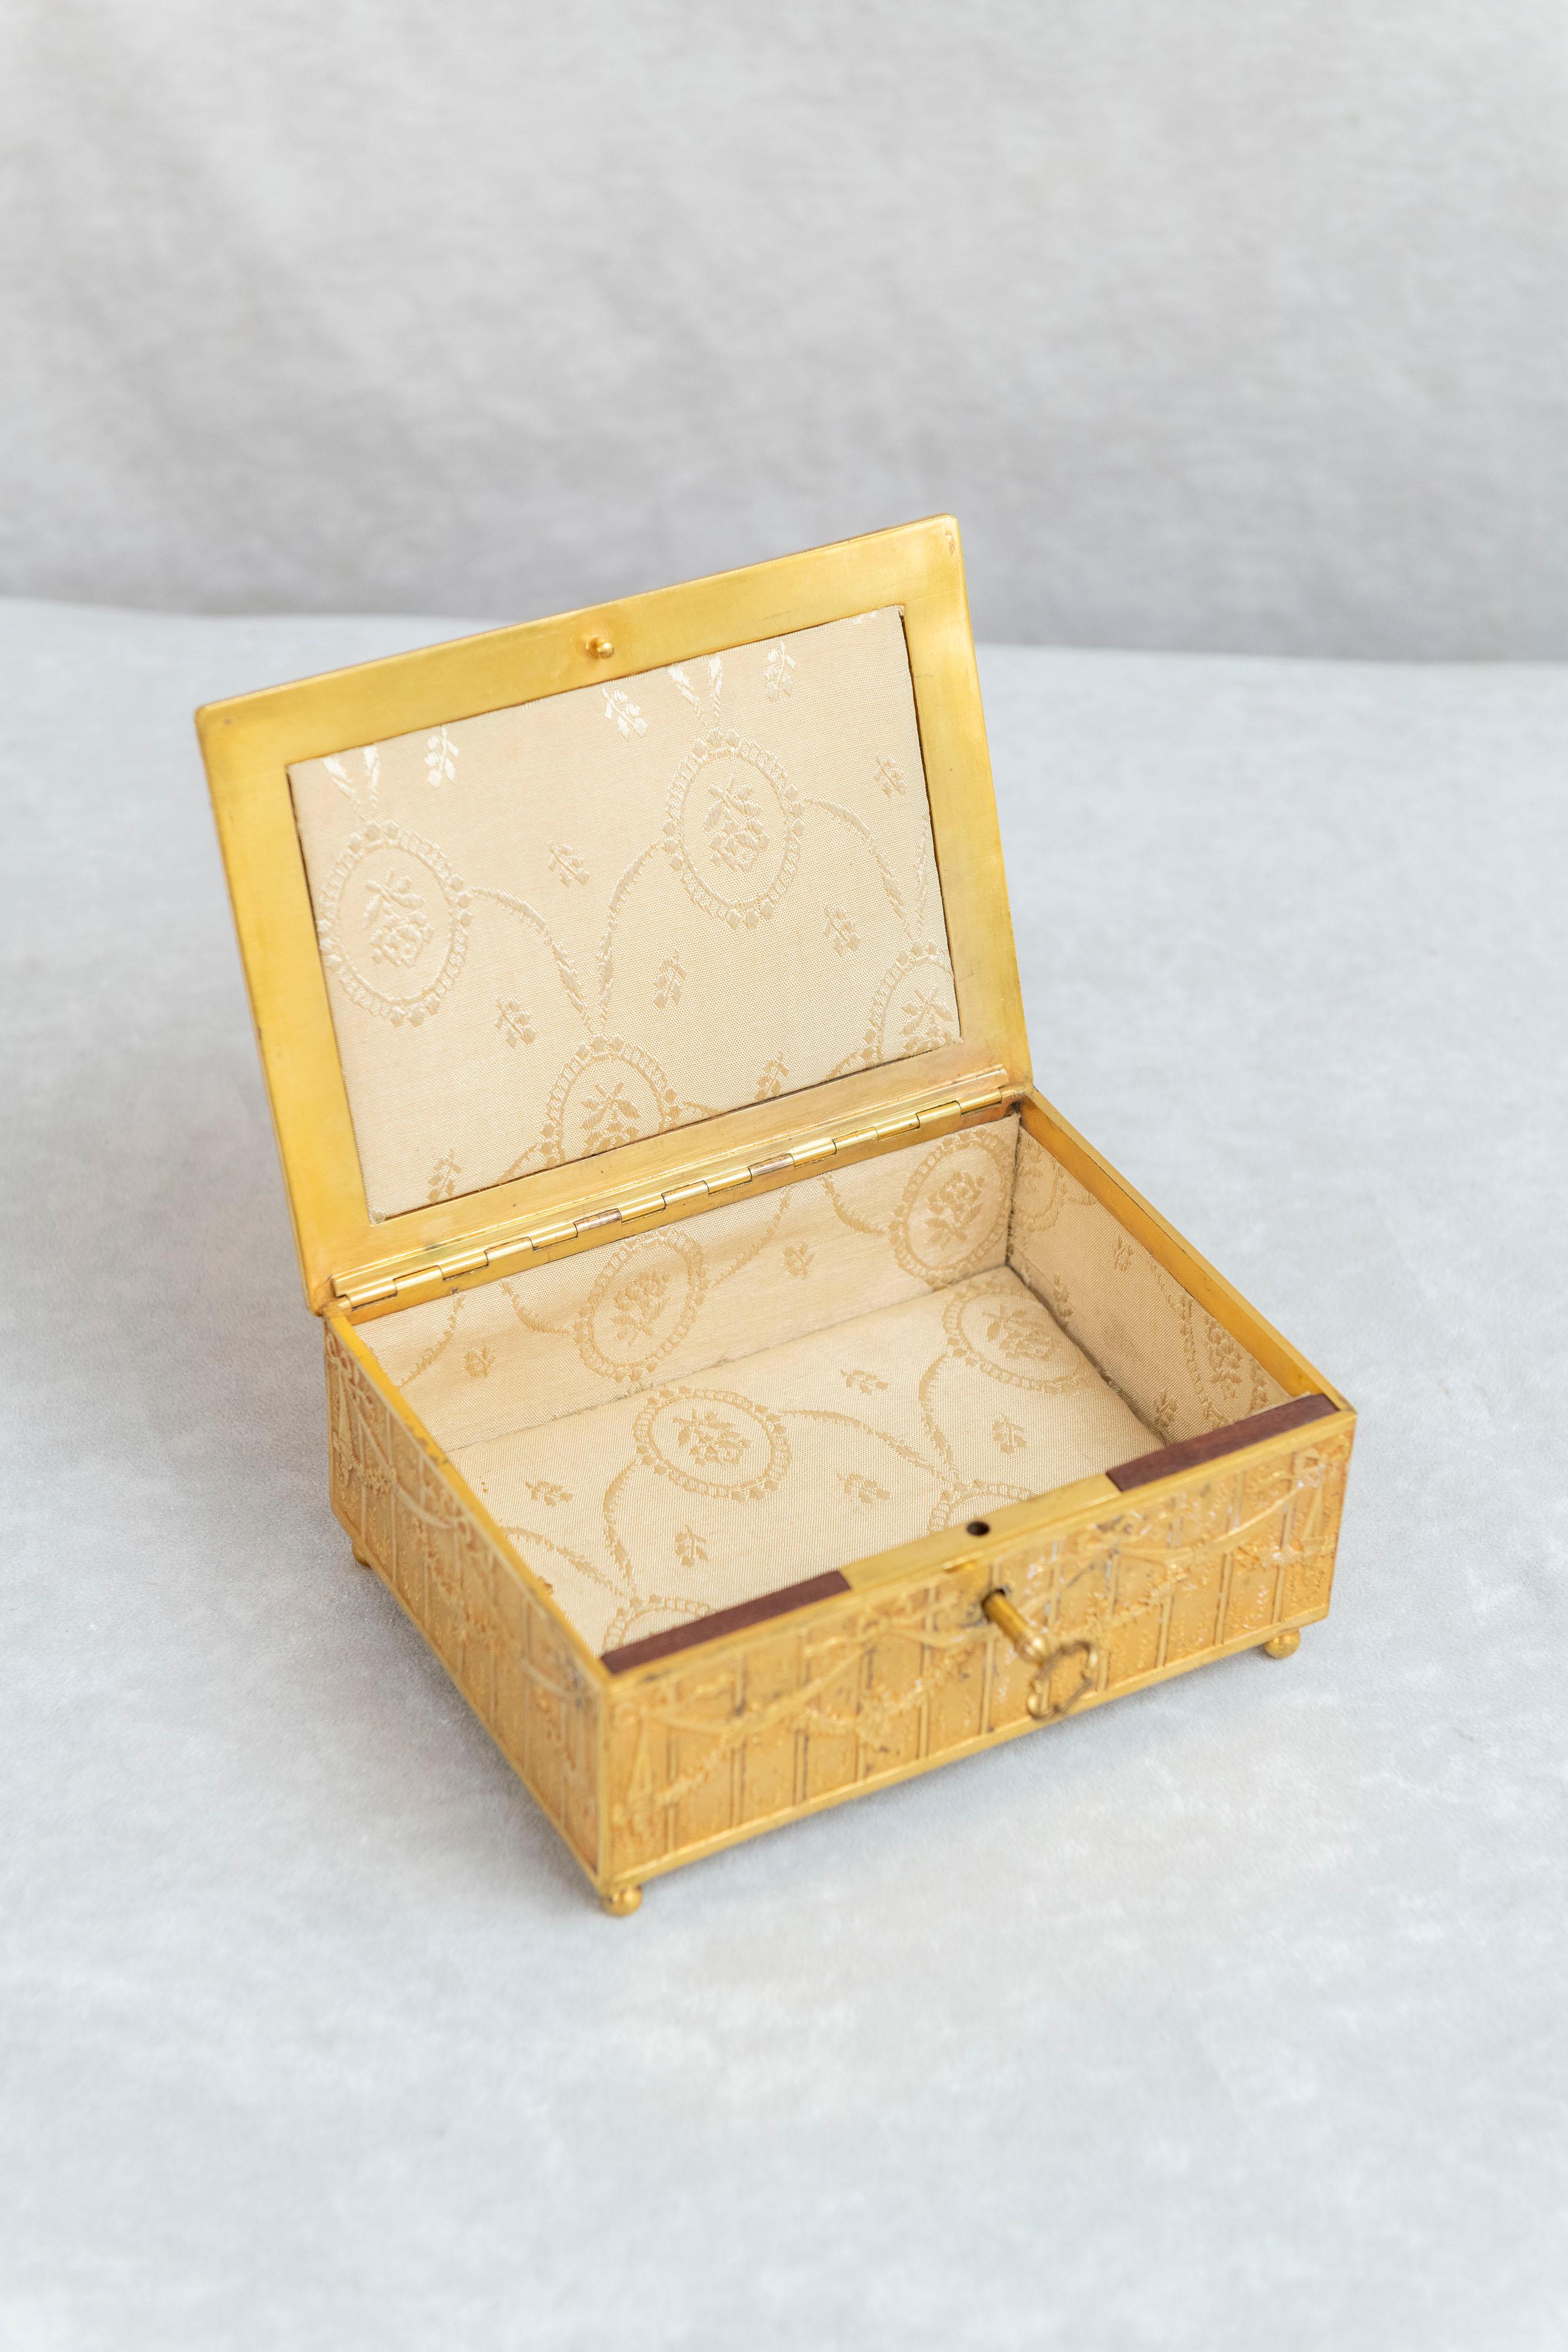 Hand-Crafted French Gilt Bronze Jewelry Box circa 1900 with Original Key Neoclassical Revival